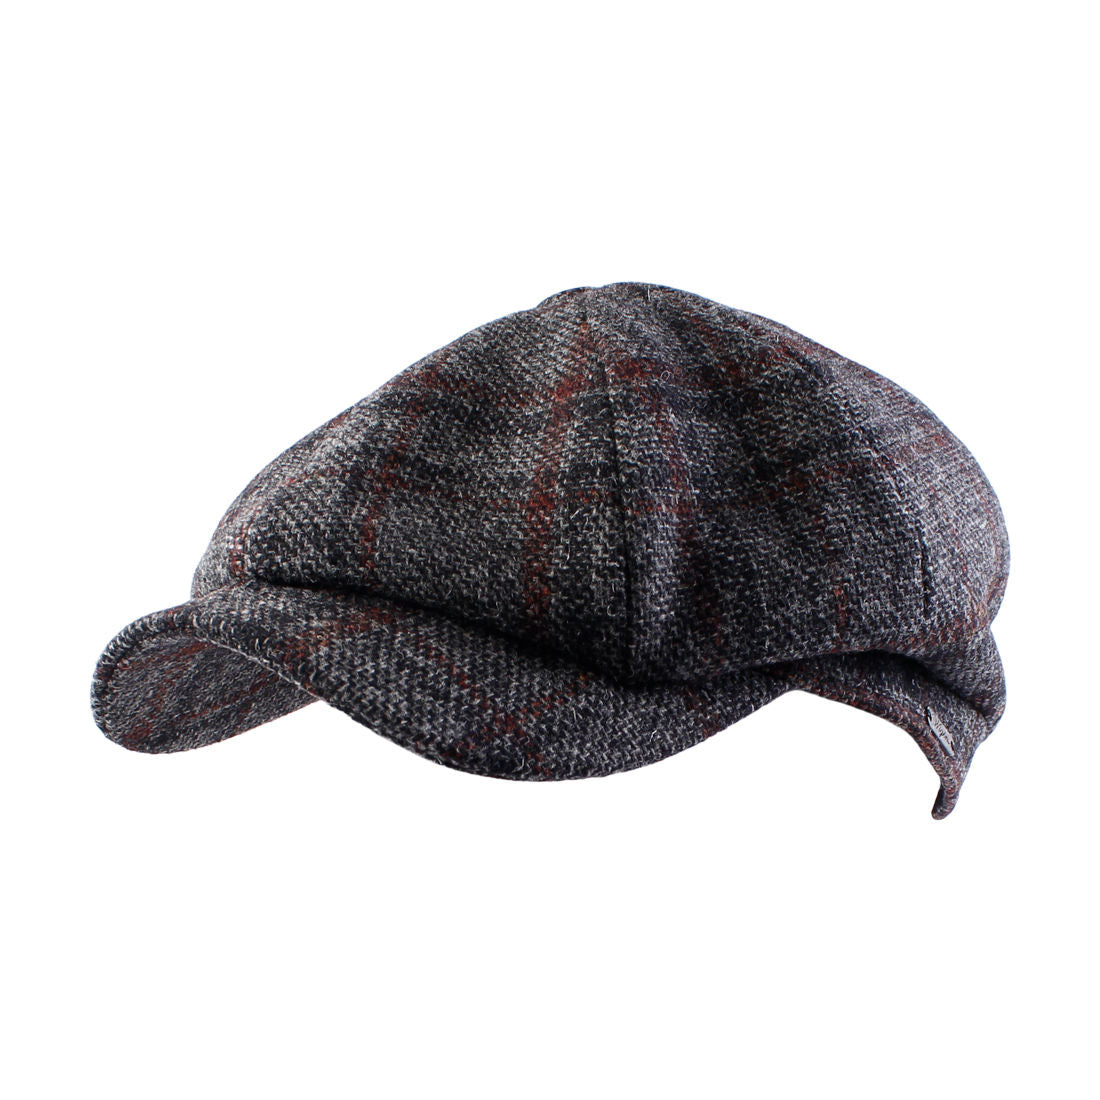 Newsboy Classic Shetland Wool Check Cap (Choice of Colors) by Wigens